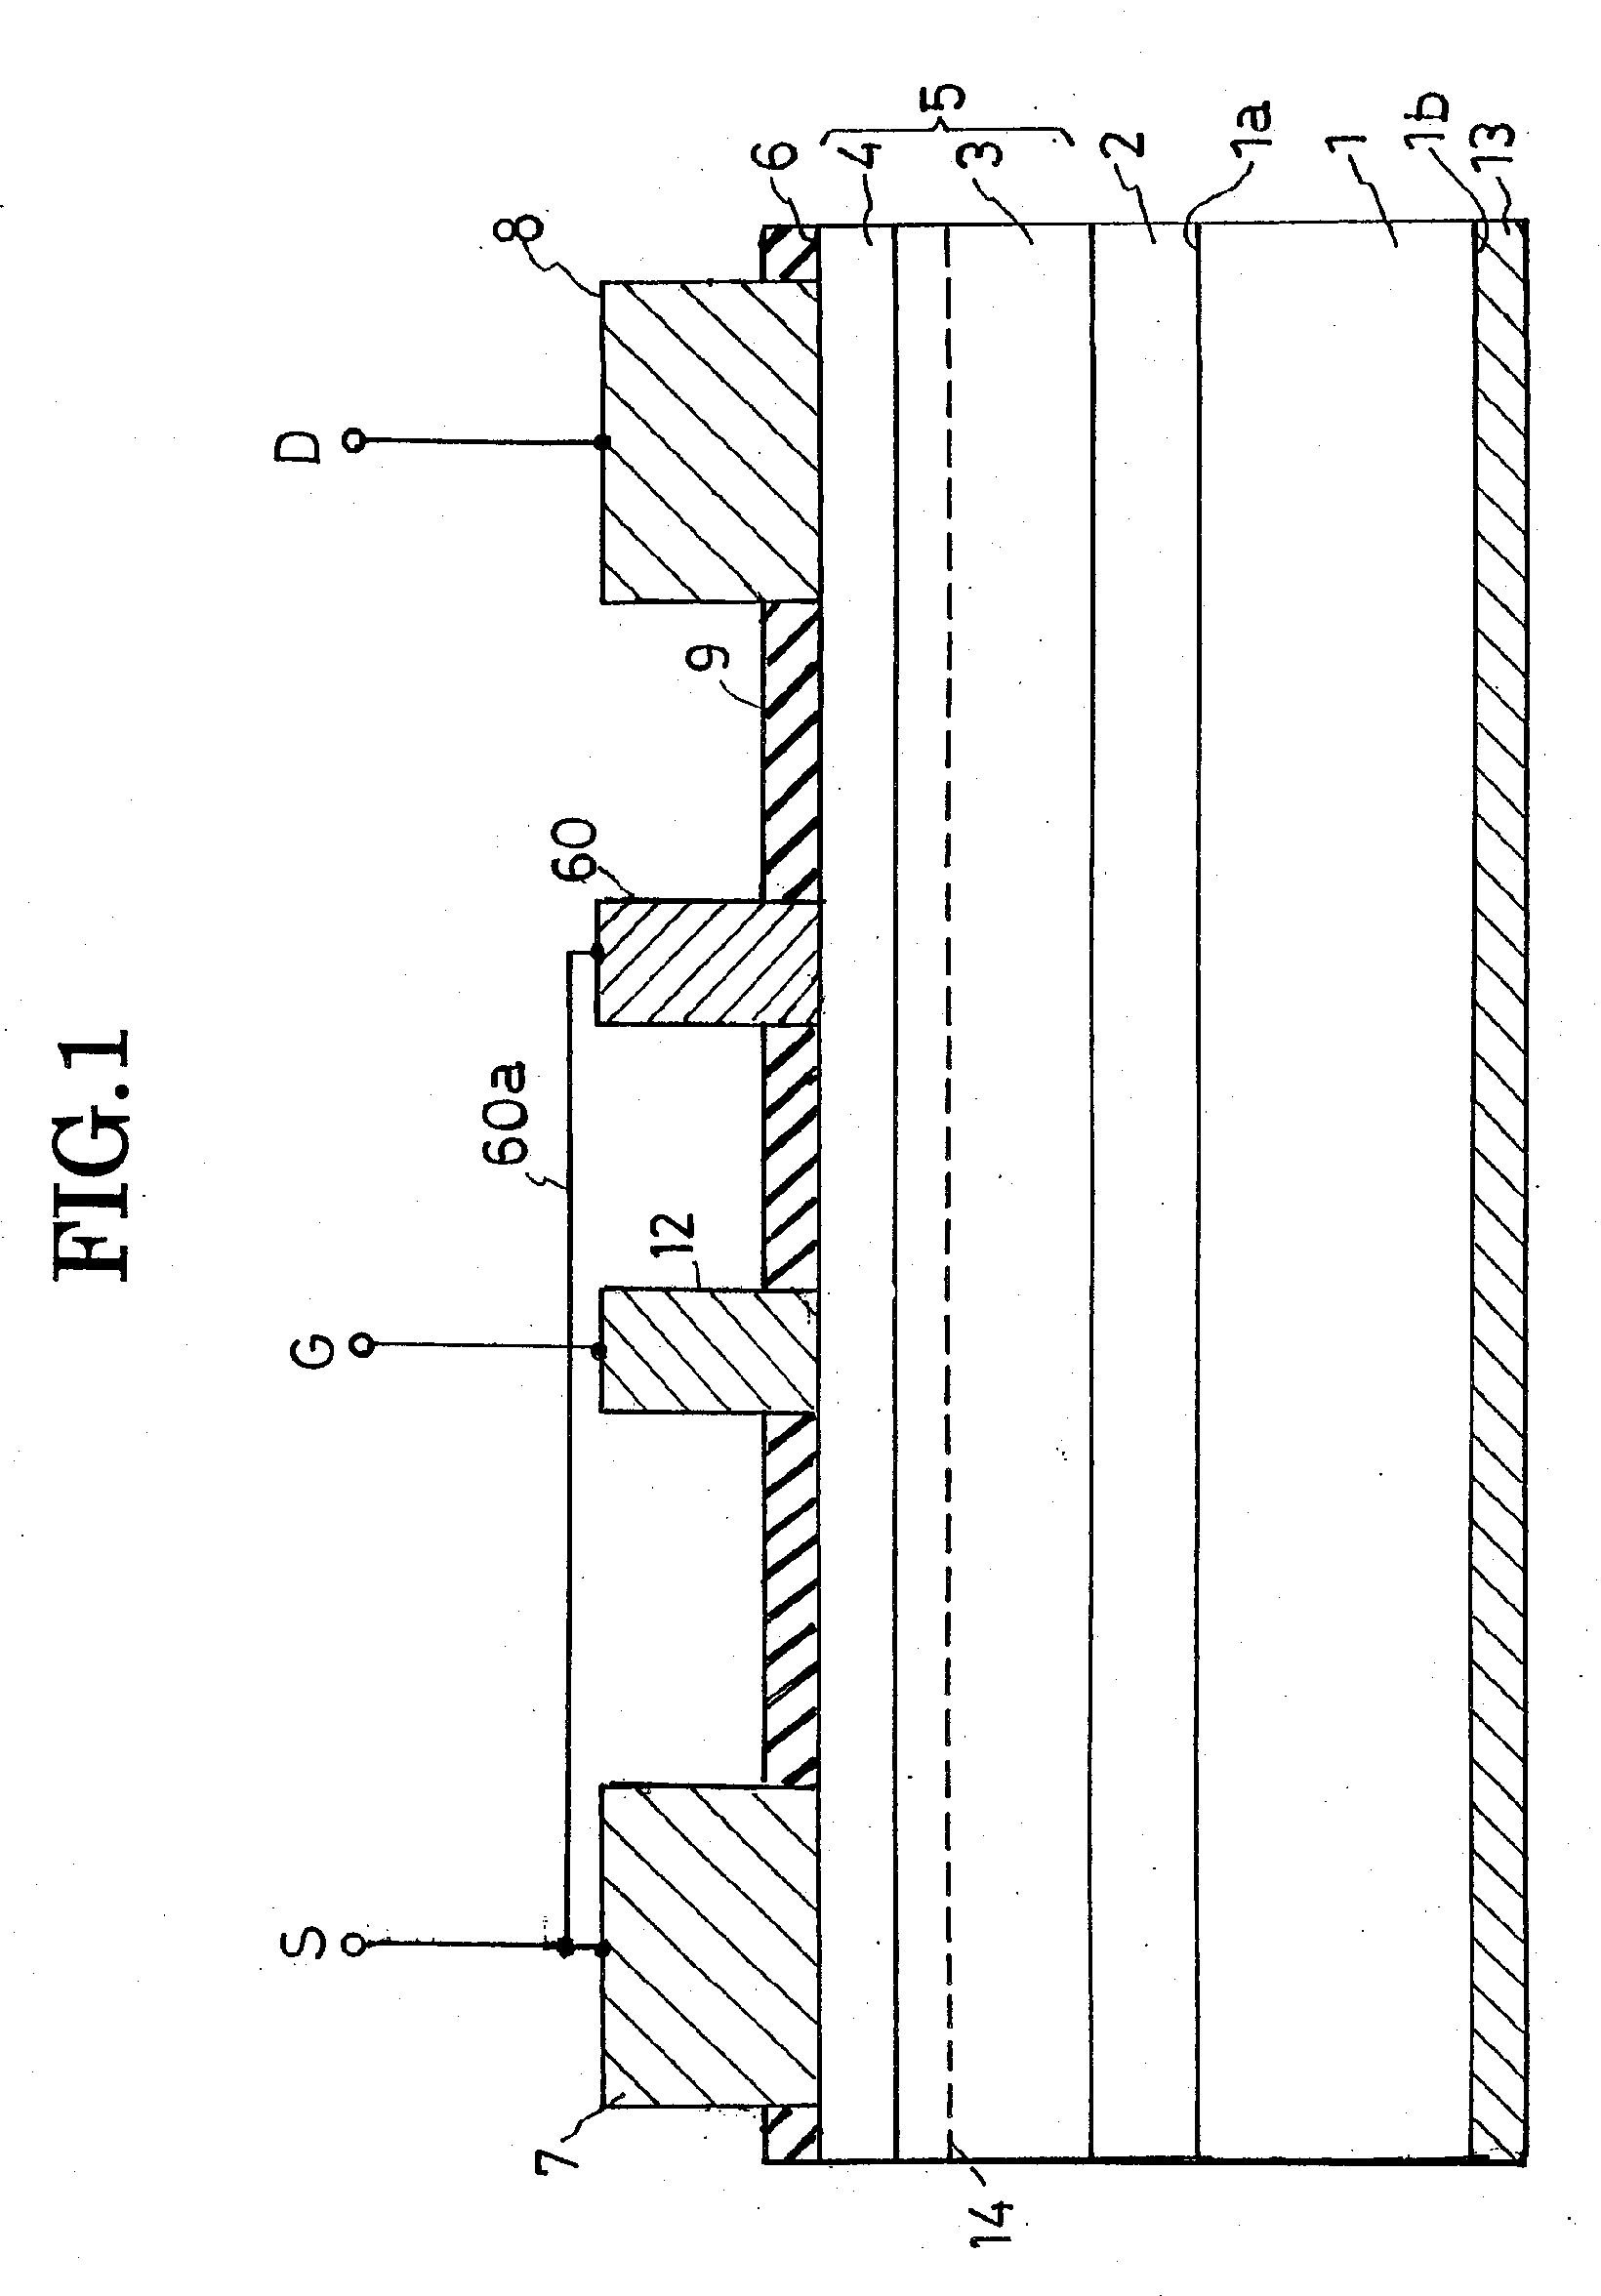 Monolithic integrated circuit of a field-effect semiconductor device and a diode